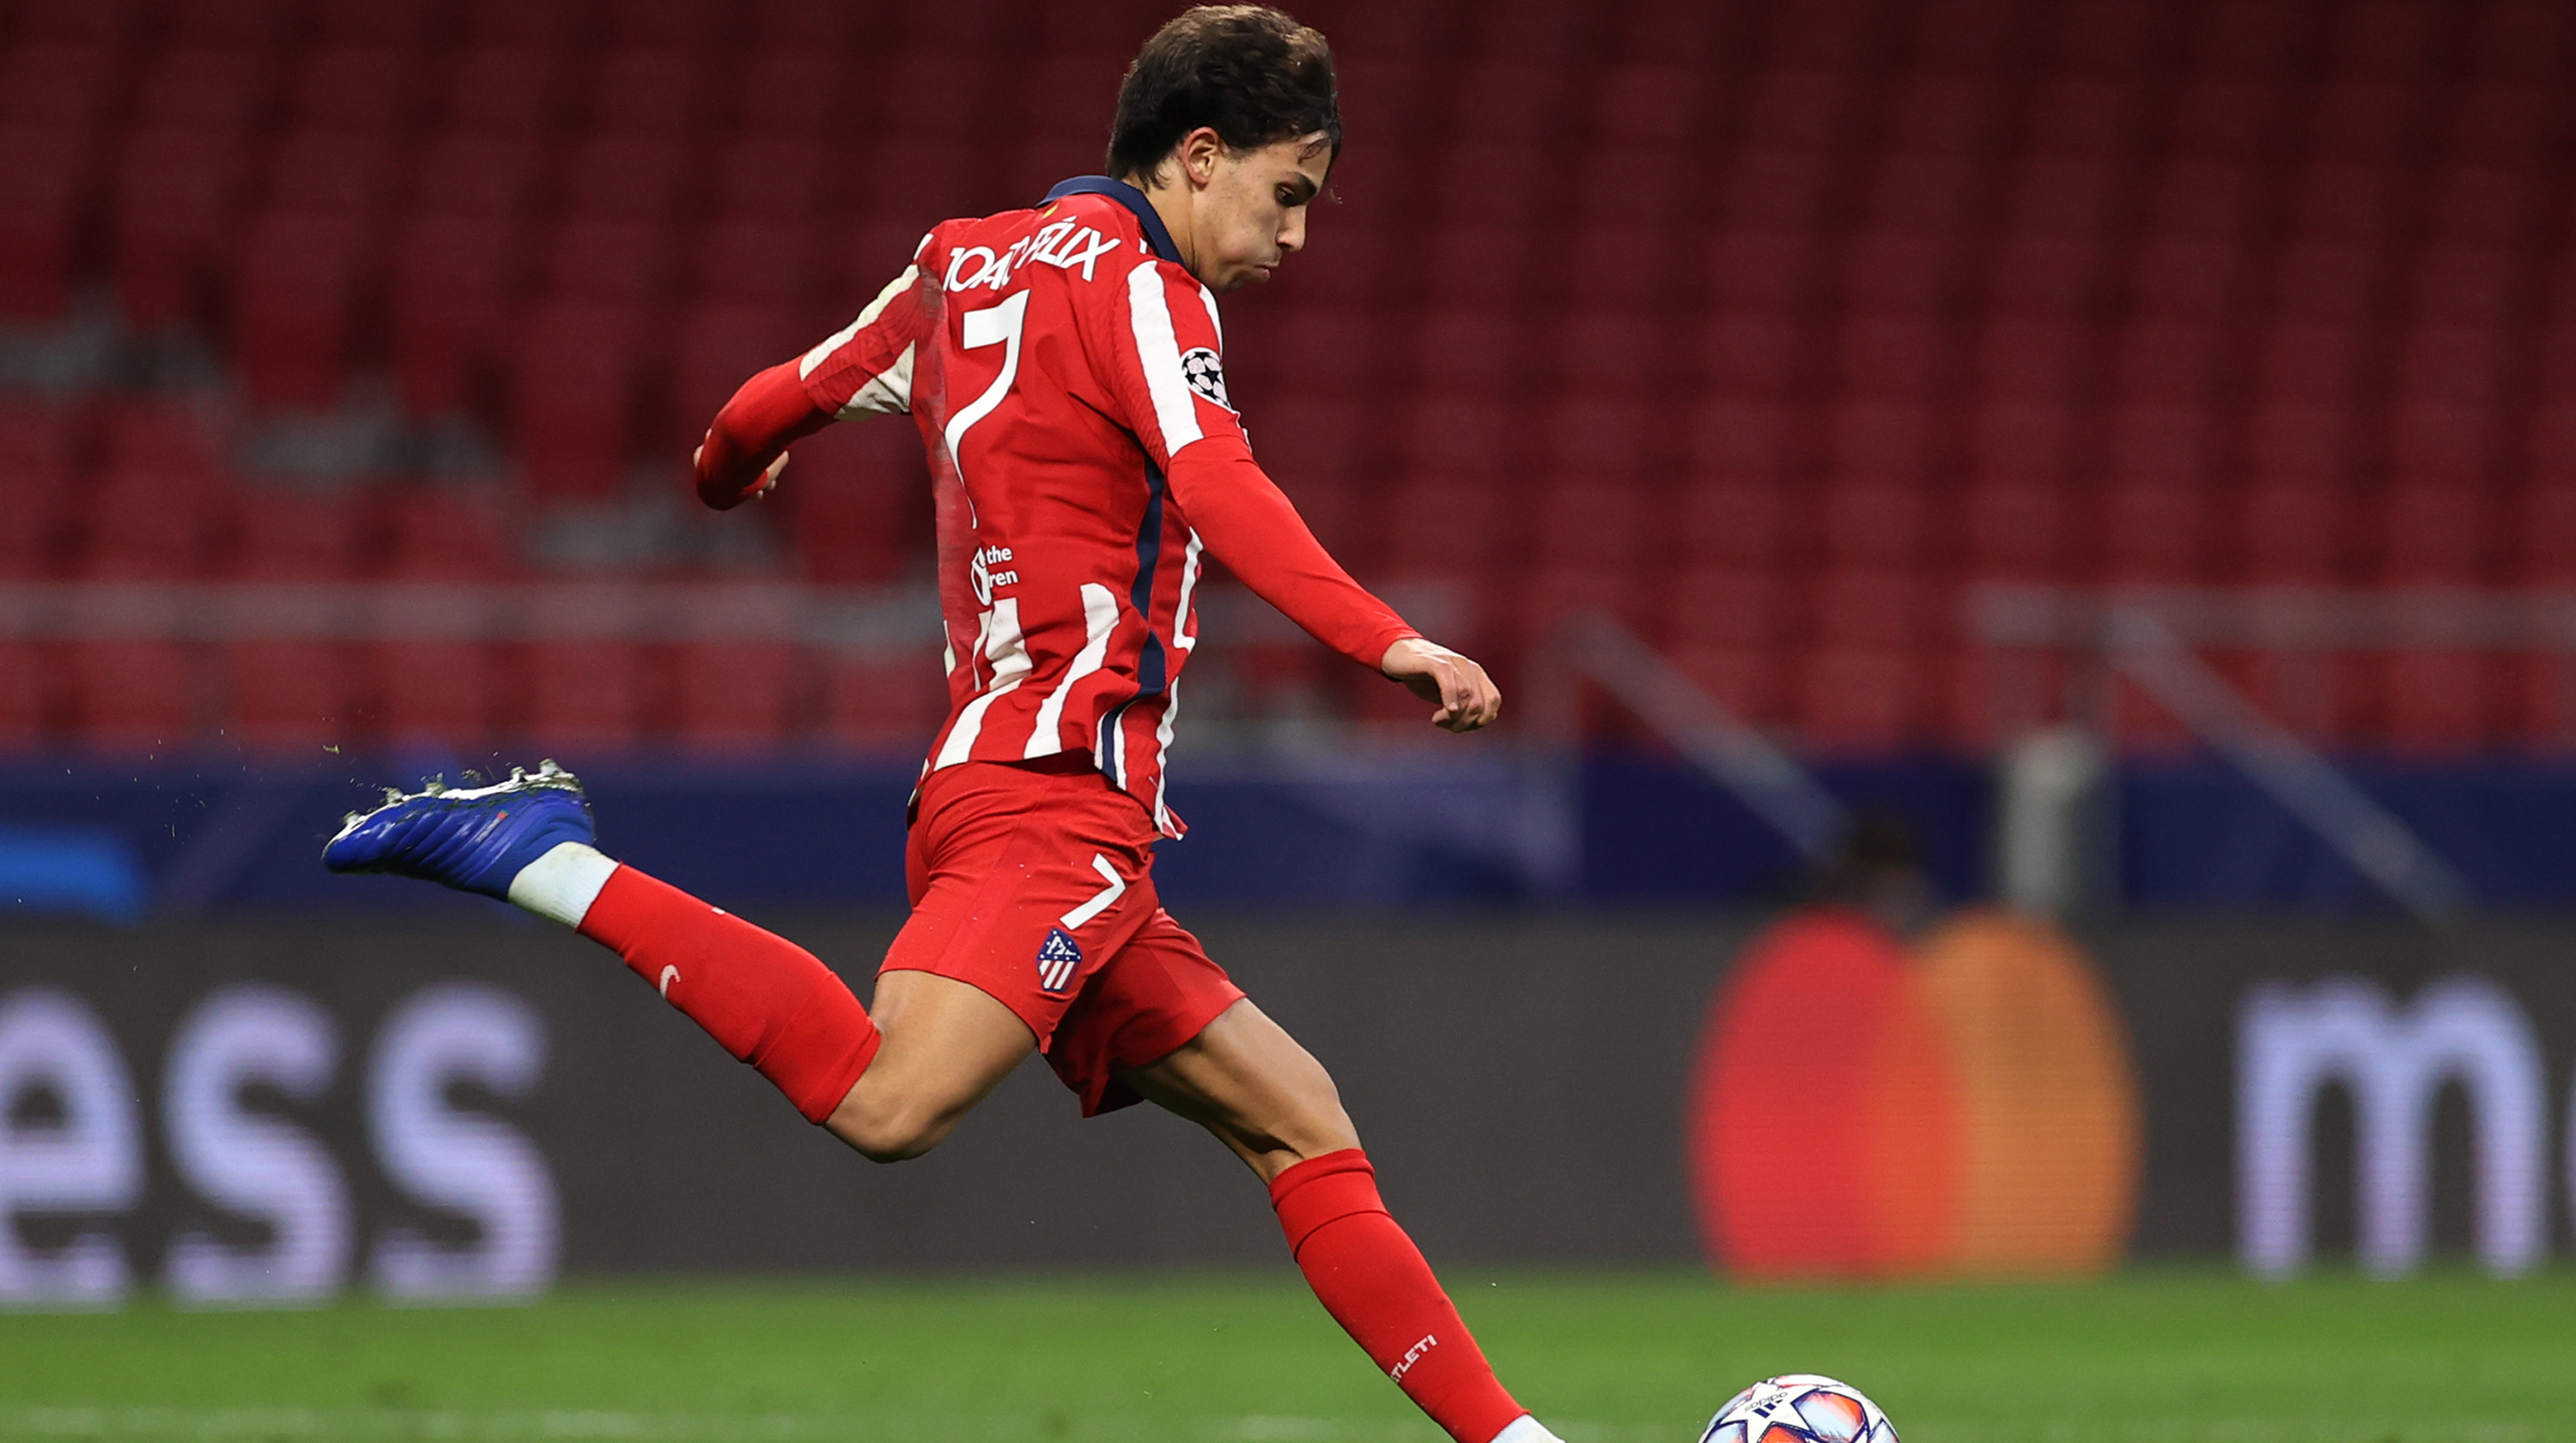 Joao Felix of Atletico de Madrid in action during the UEFA Champions League Group A stage match between Atletico de Madrid and RB Salzburg at Estadio Wanda Metropolitano on October 27, 2020